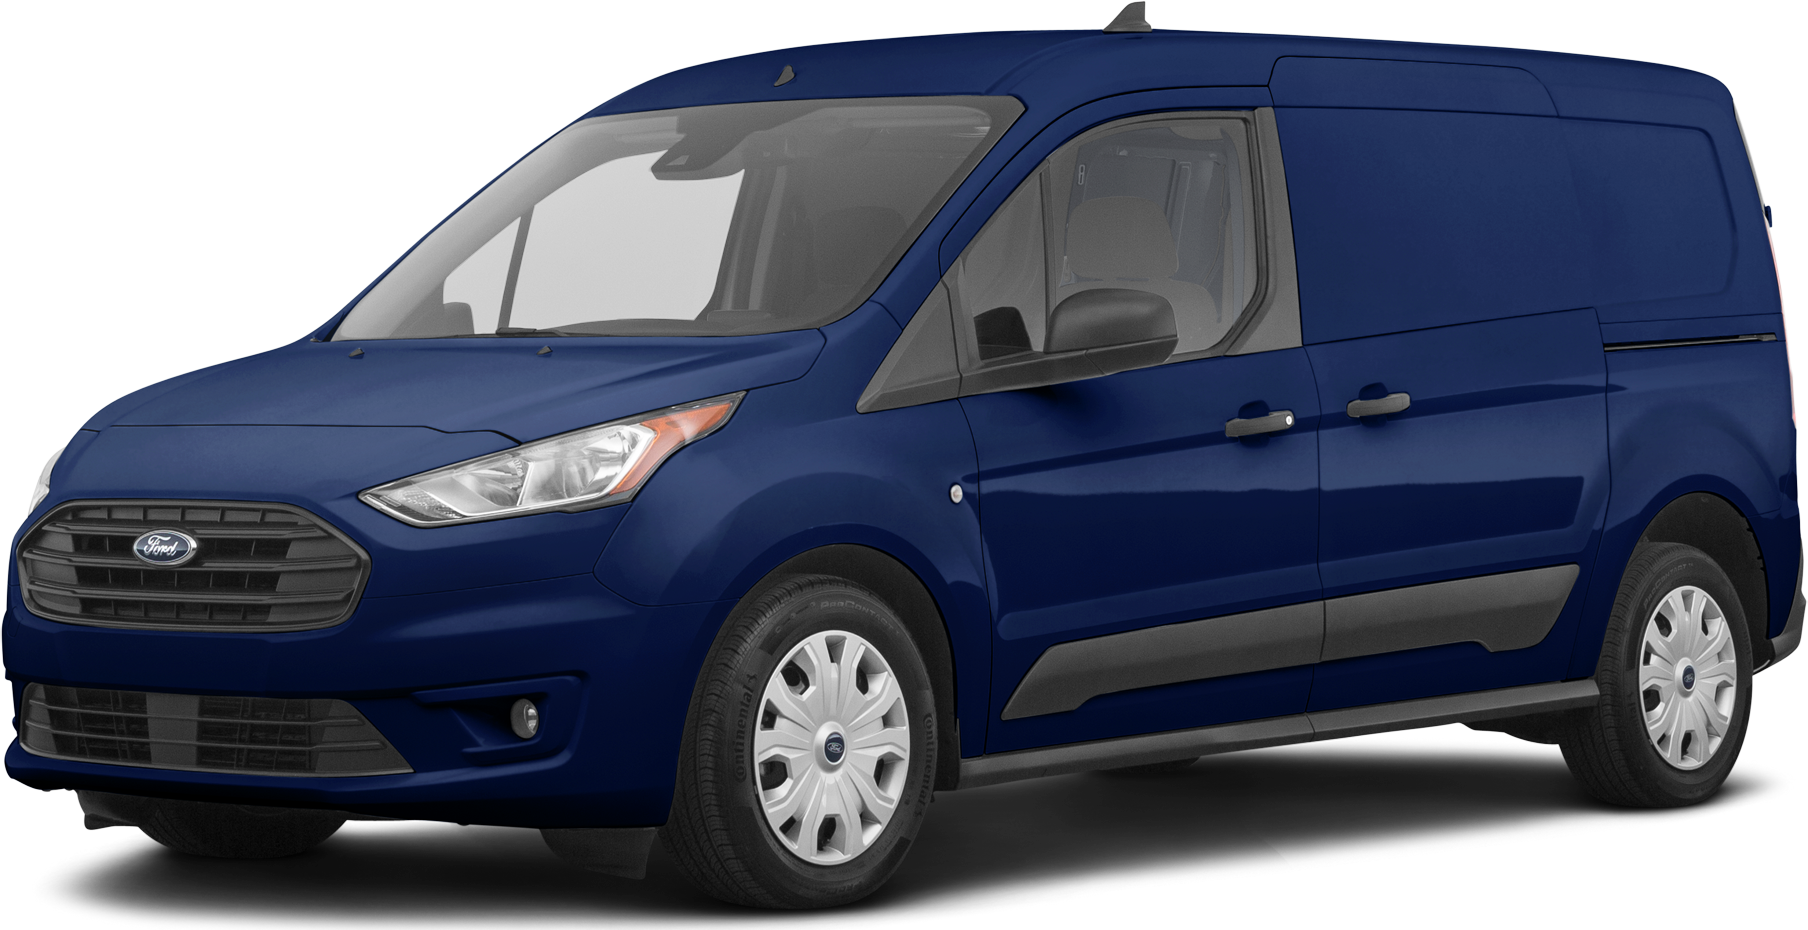 2019 Ford Transit Connect Cargo Price, Value, Ratings & Reviews